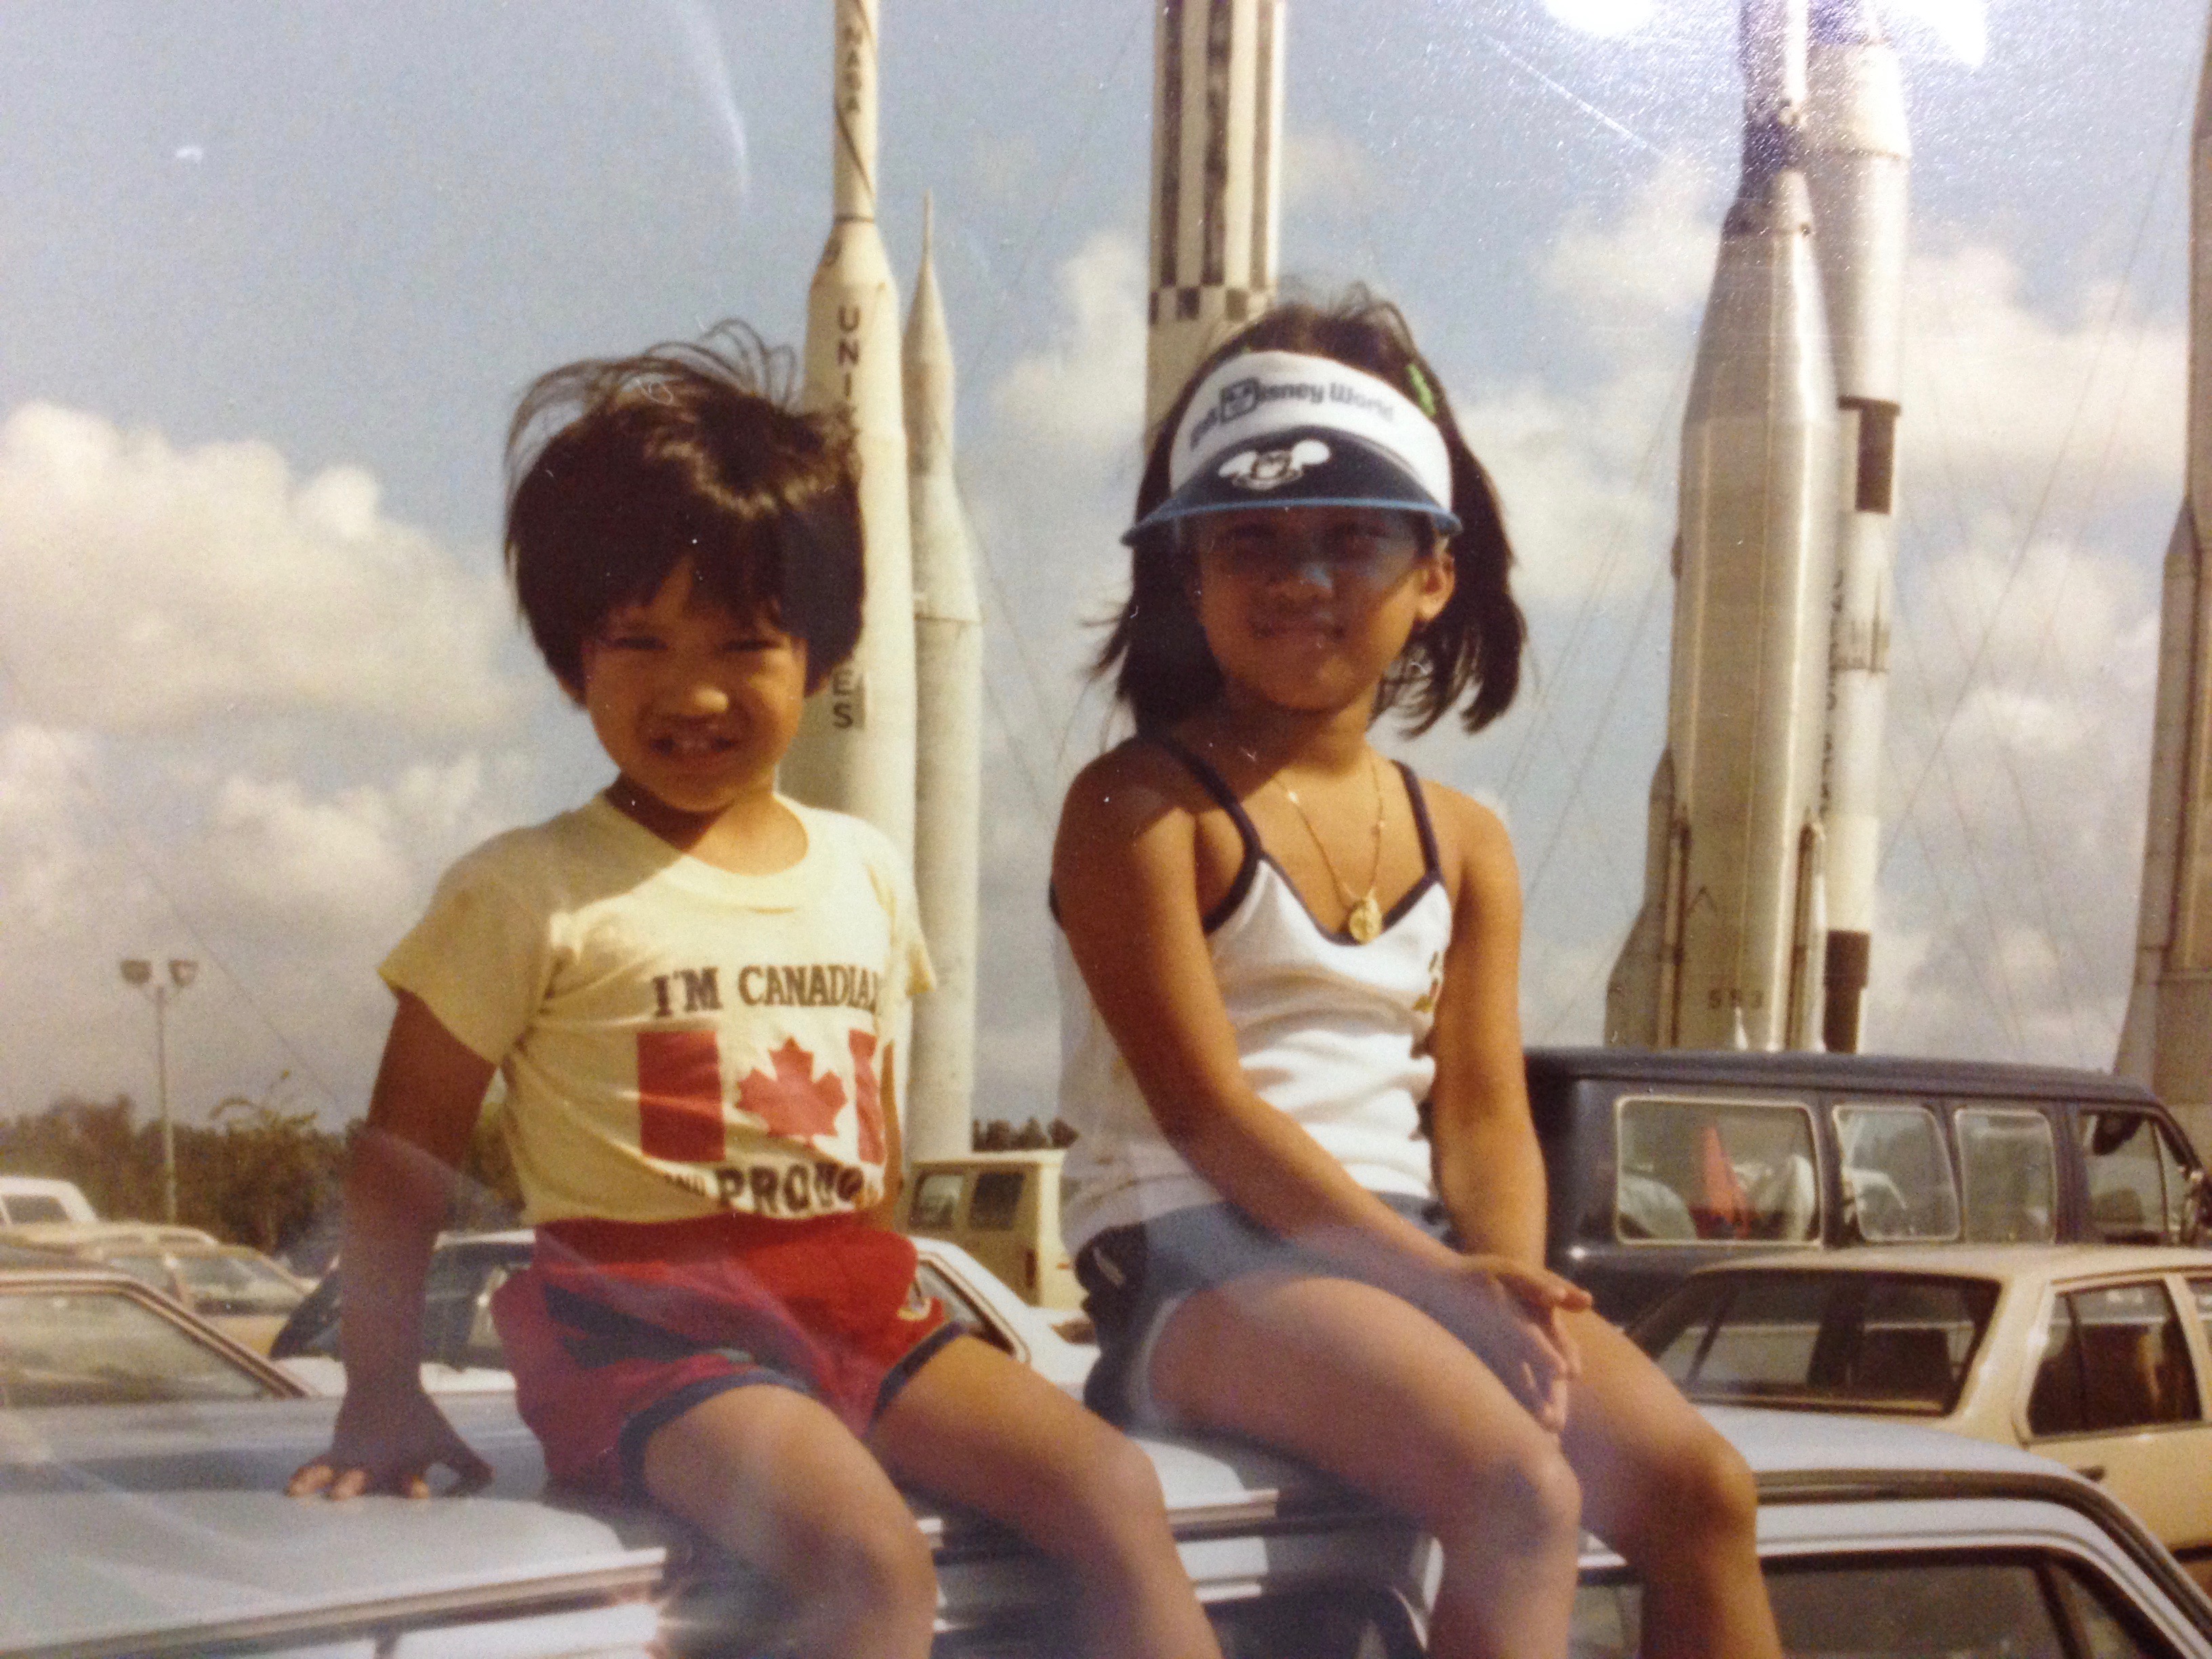 Two young children sit on a car in front of rocket ships